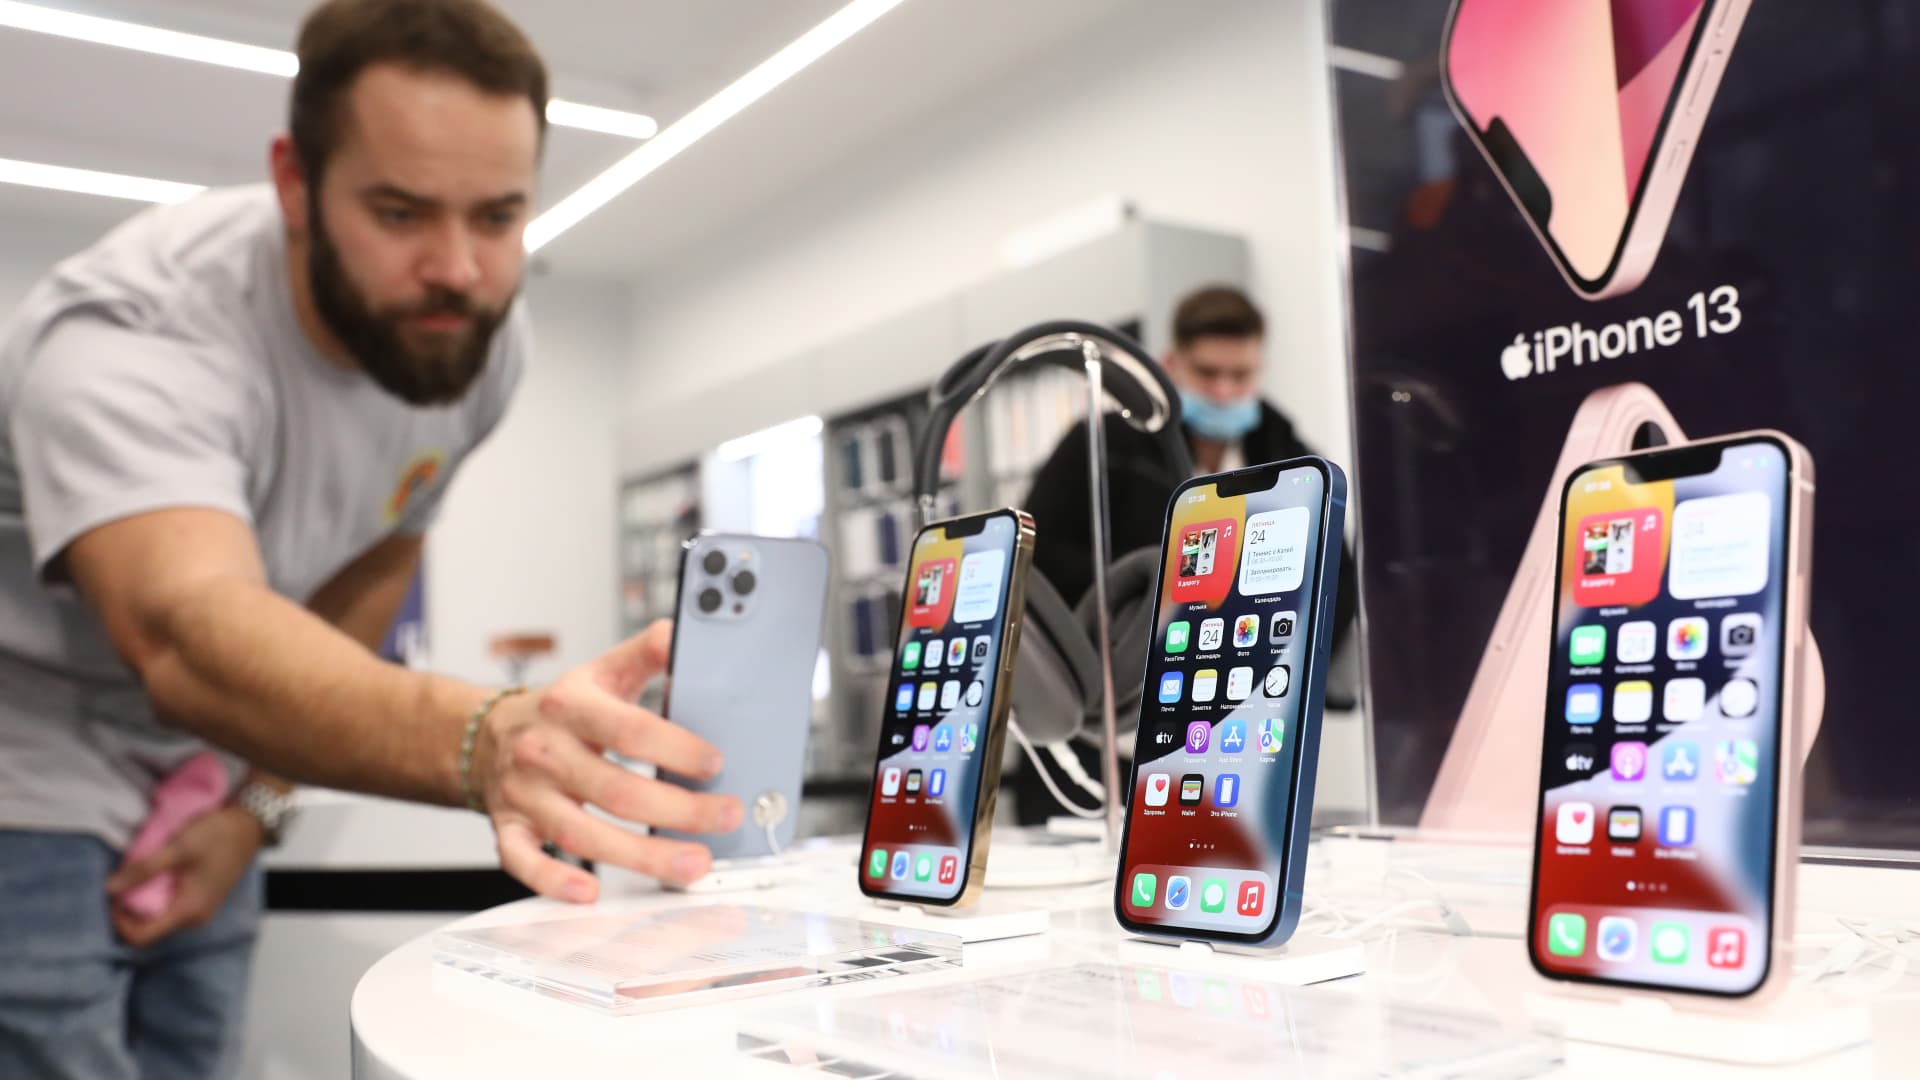 New Apple iPhone 13 smartphones on display in the re:Store shop. The iPhone 13 went on sale on 24 September in Russia.